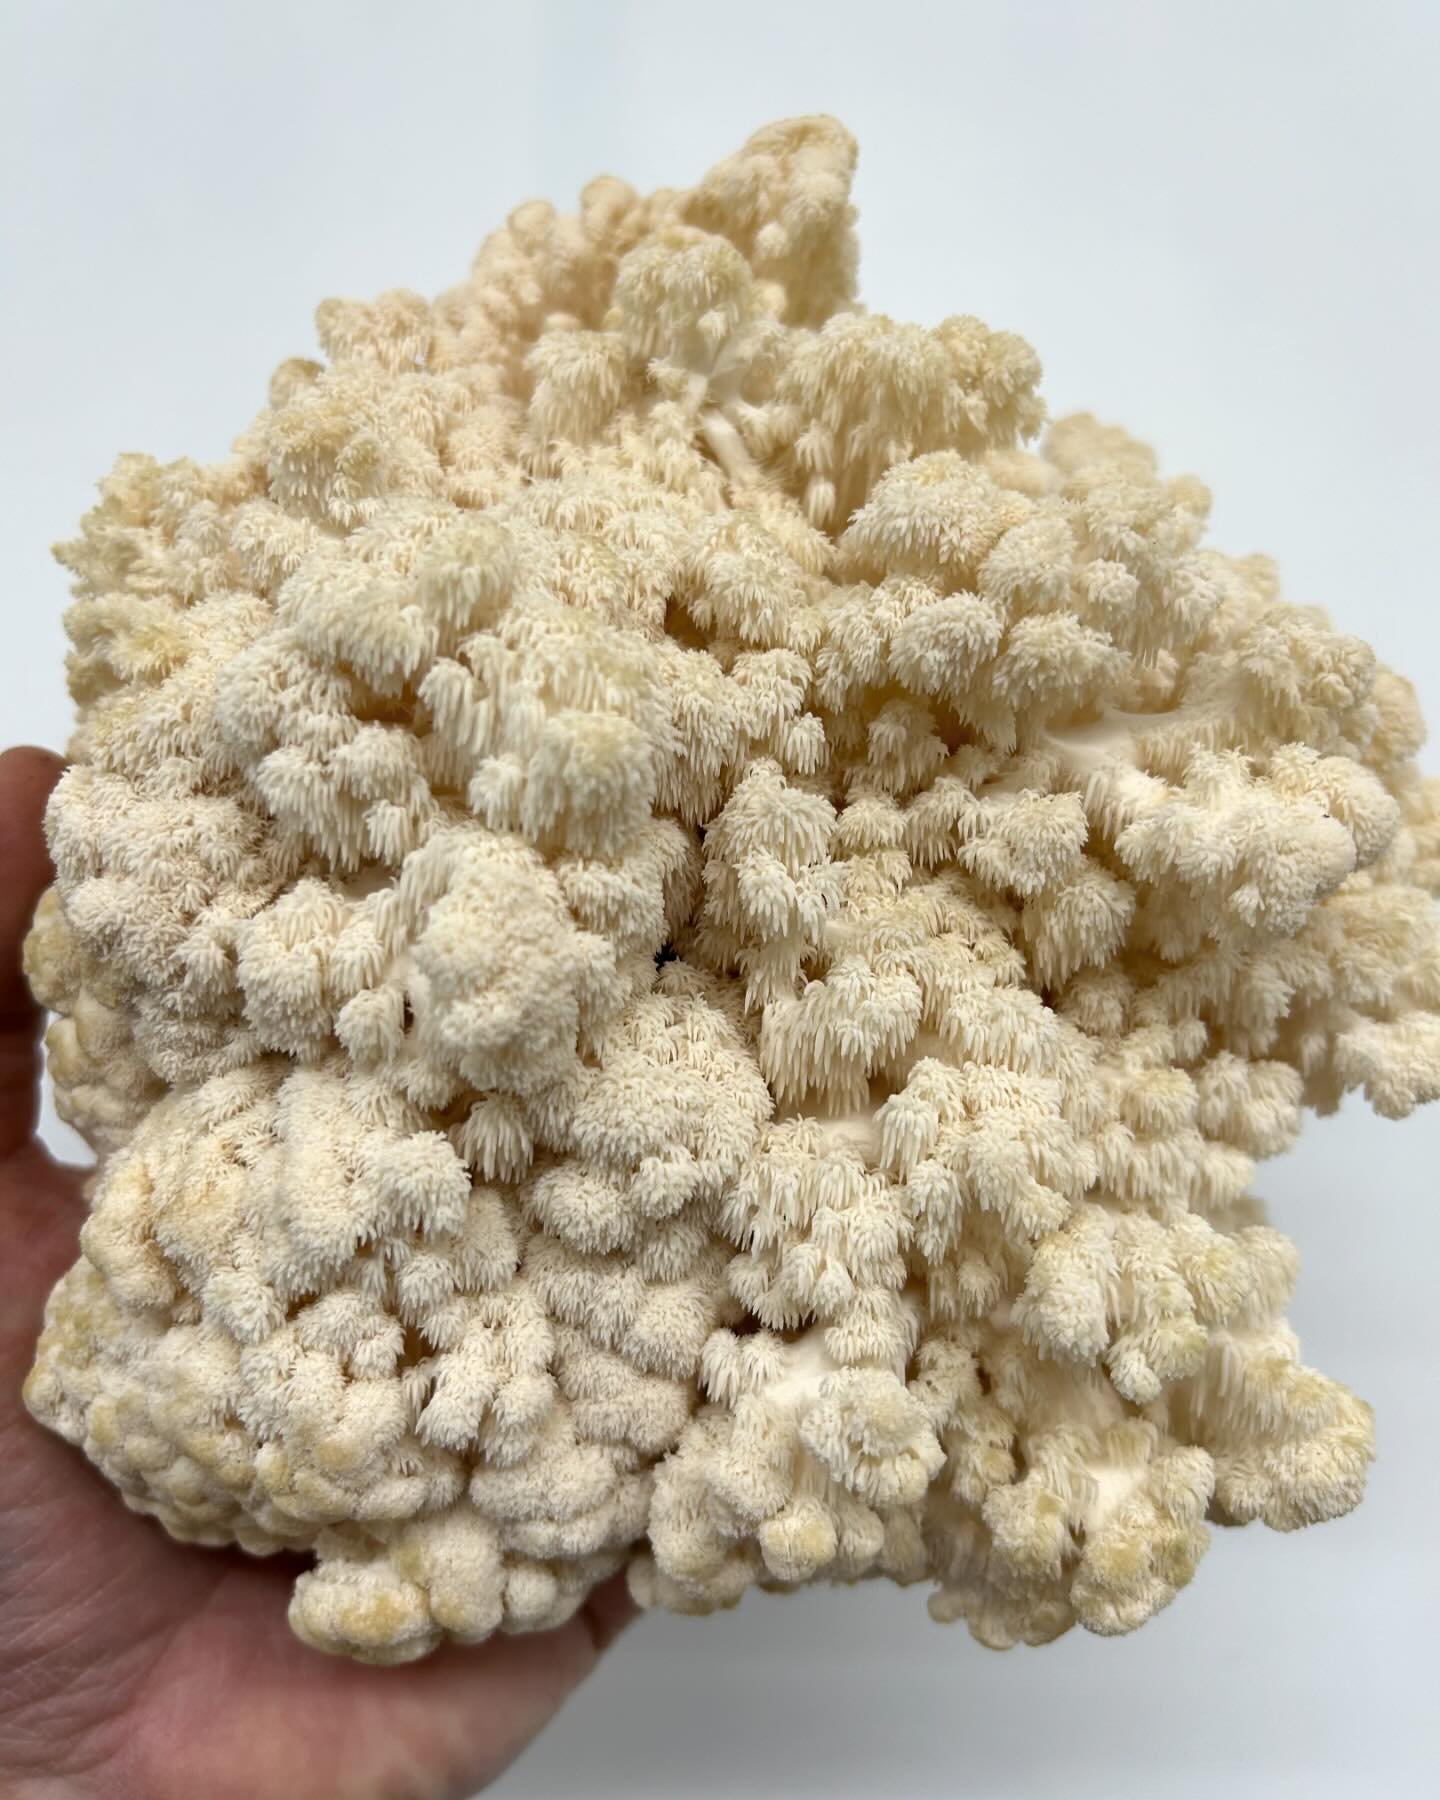 This weeks subscribers received a half pound of Comb Tooth, a quarter pound of Chestnut mushrooms and a quarter pound of Black Pearl King Oysters. 
Go to TheHappyMushroom.com to sign up today!
$20 value of mushrooms weekly or biweekly.